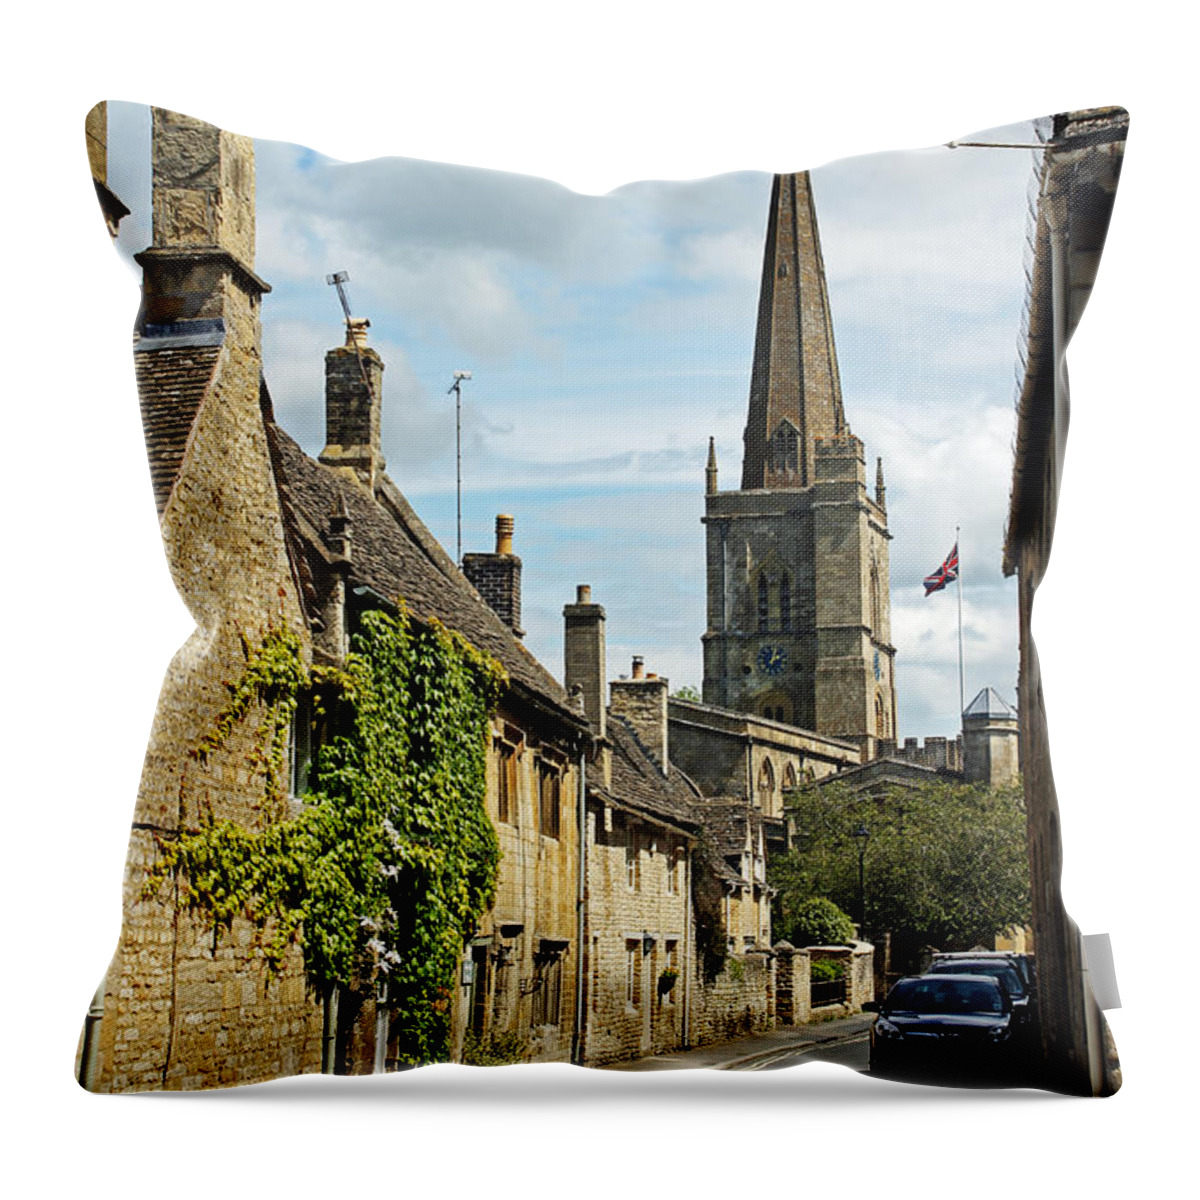 Burford Throw Pillow featuring the photograph Burford Village Street by Tony Murtagh